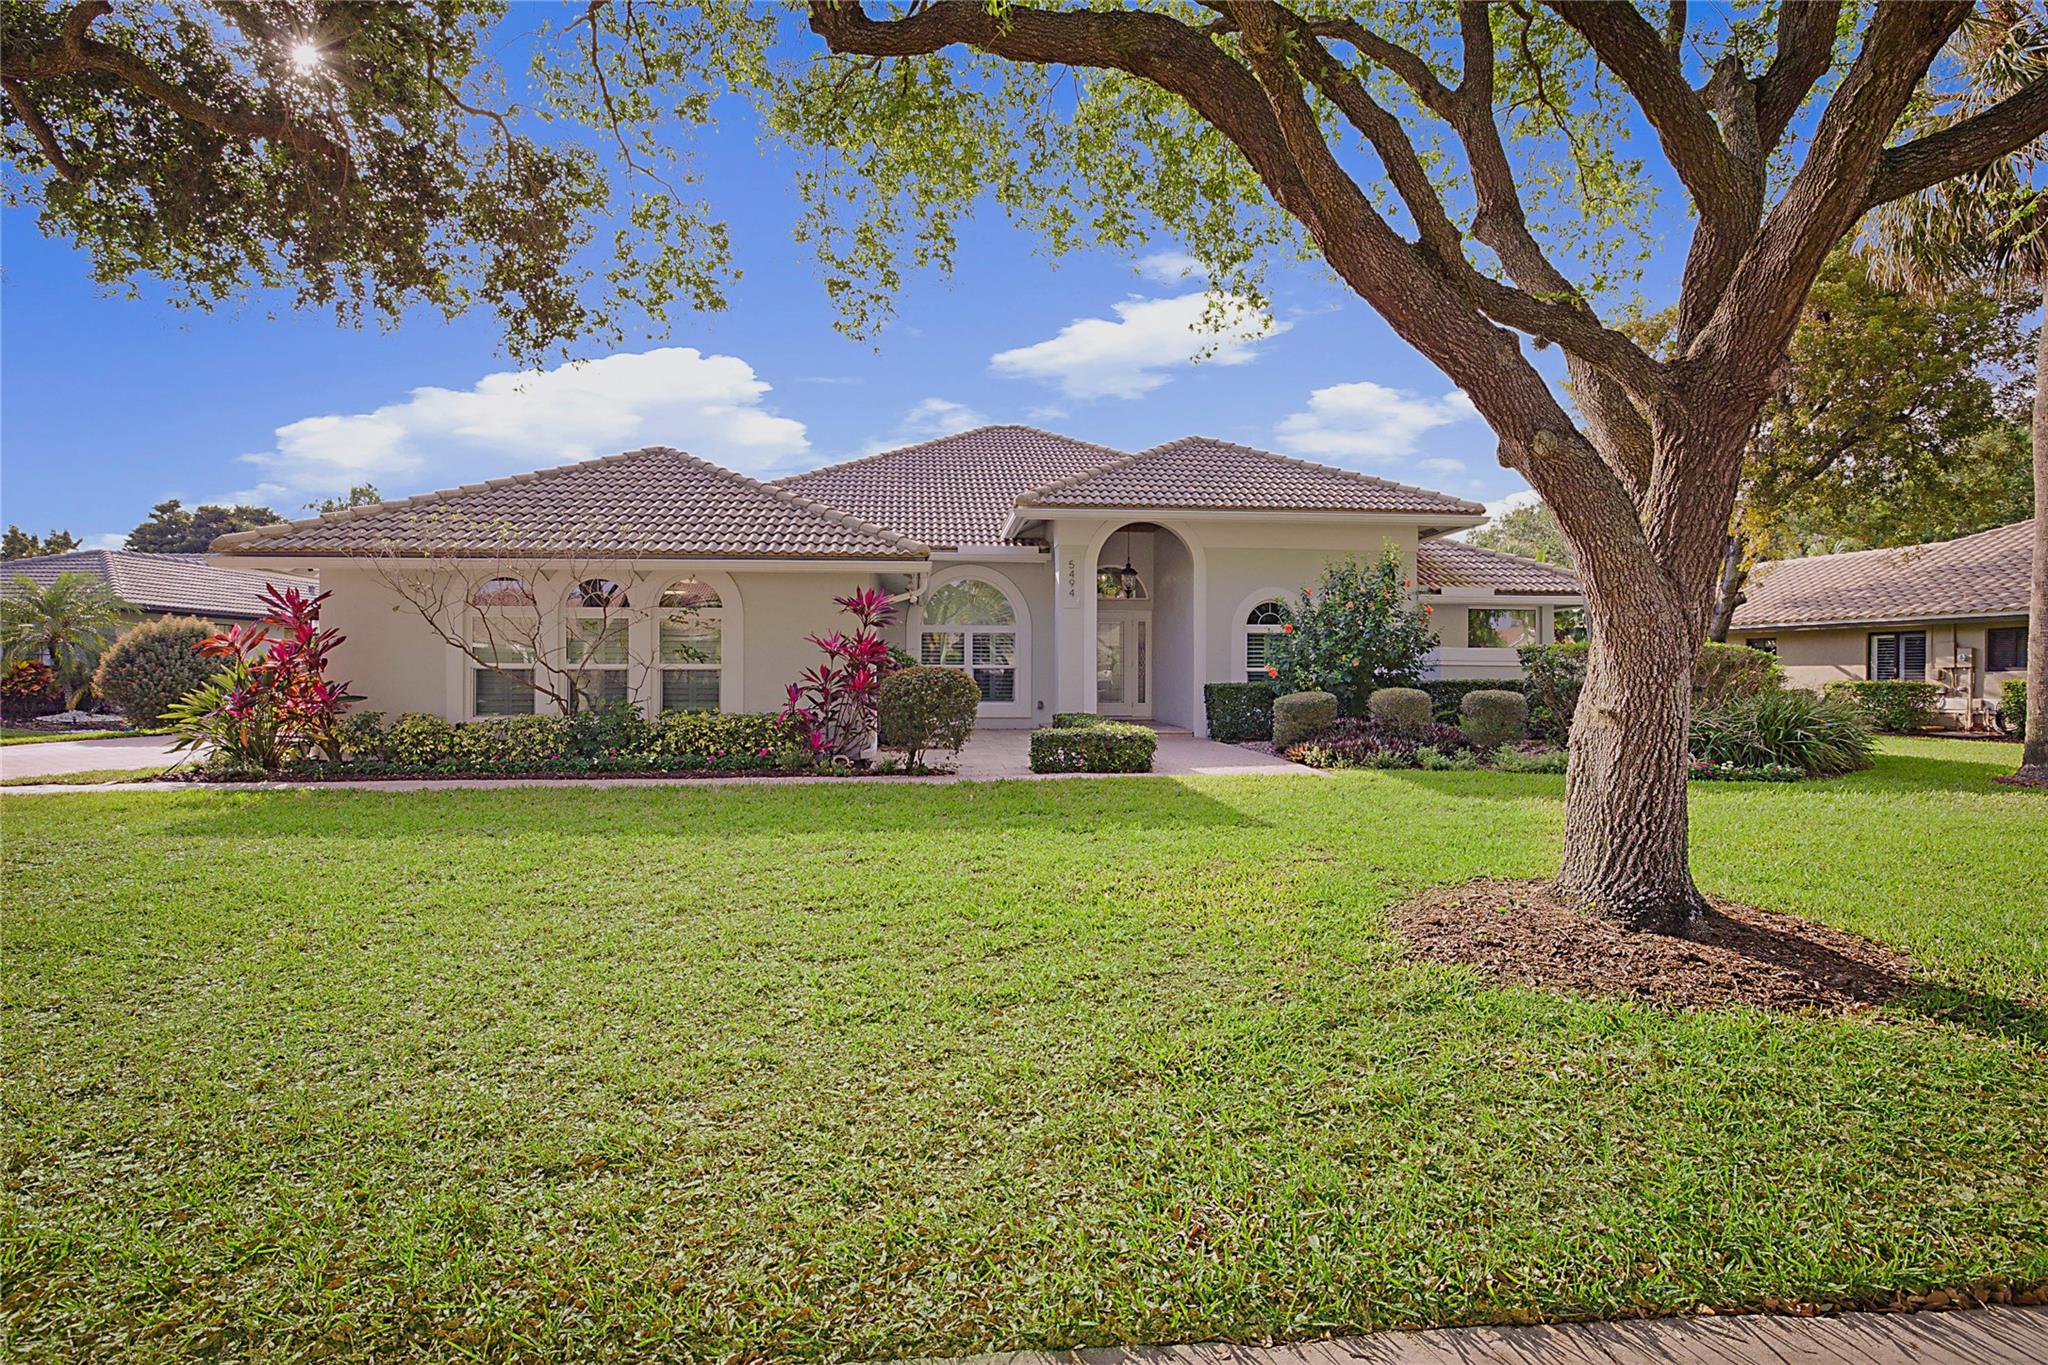 Welcome Home to this 4 bedroom, 3 bath, side entry Garage, pool home!